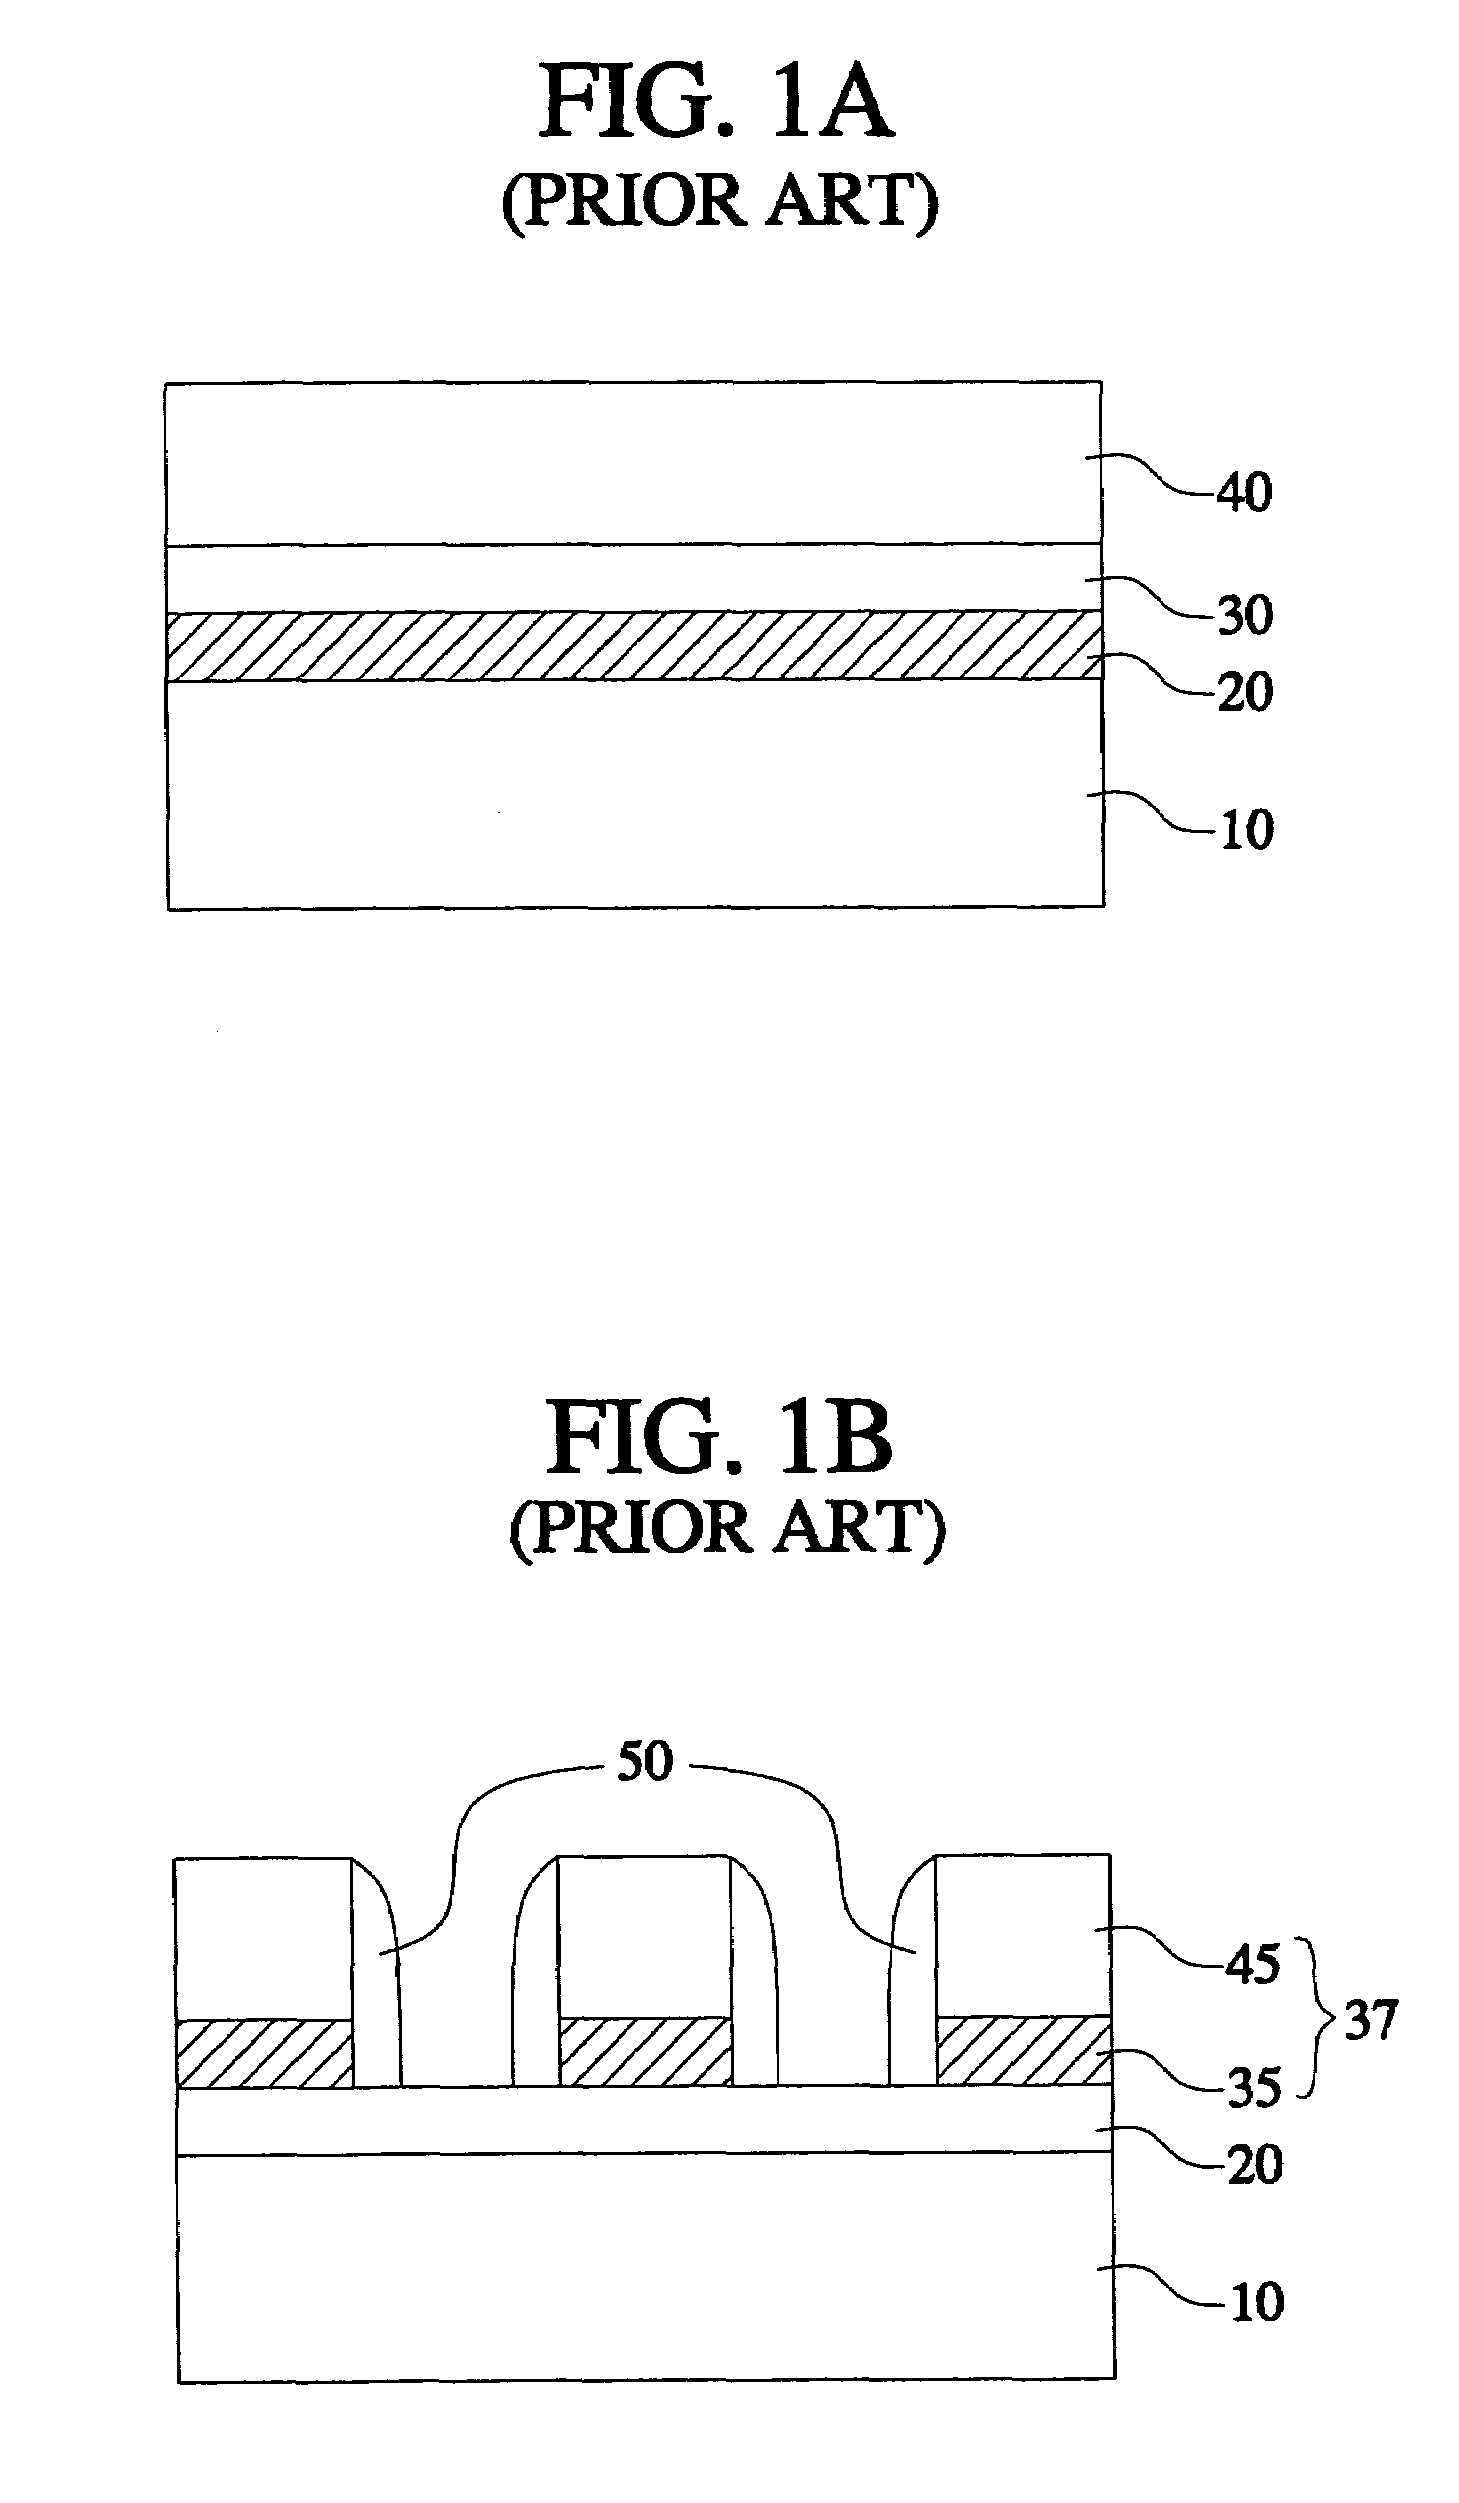 Method of forming a self-aligned contact structure using a sacrificial mask layer